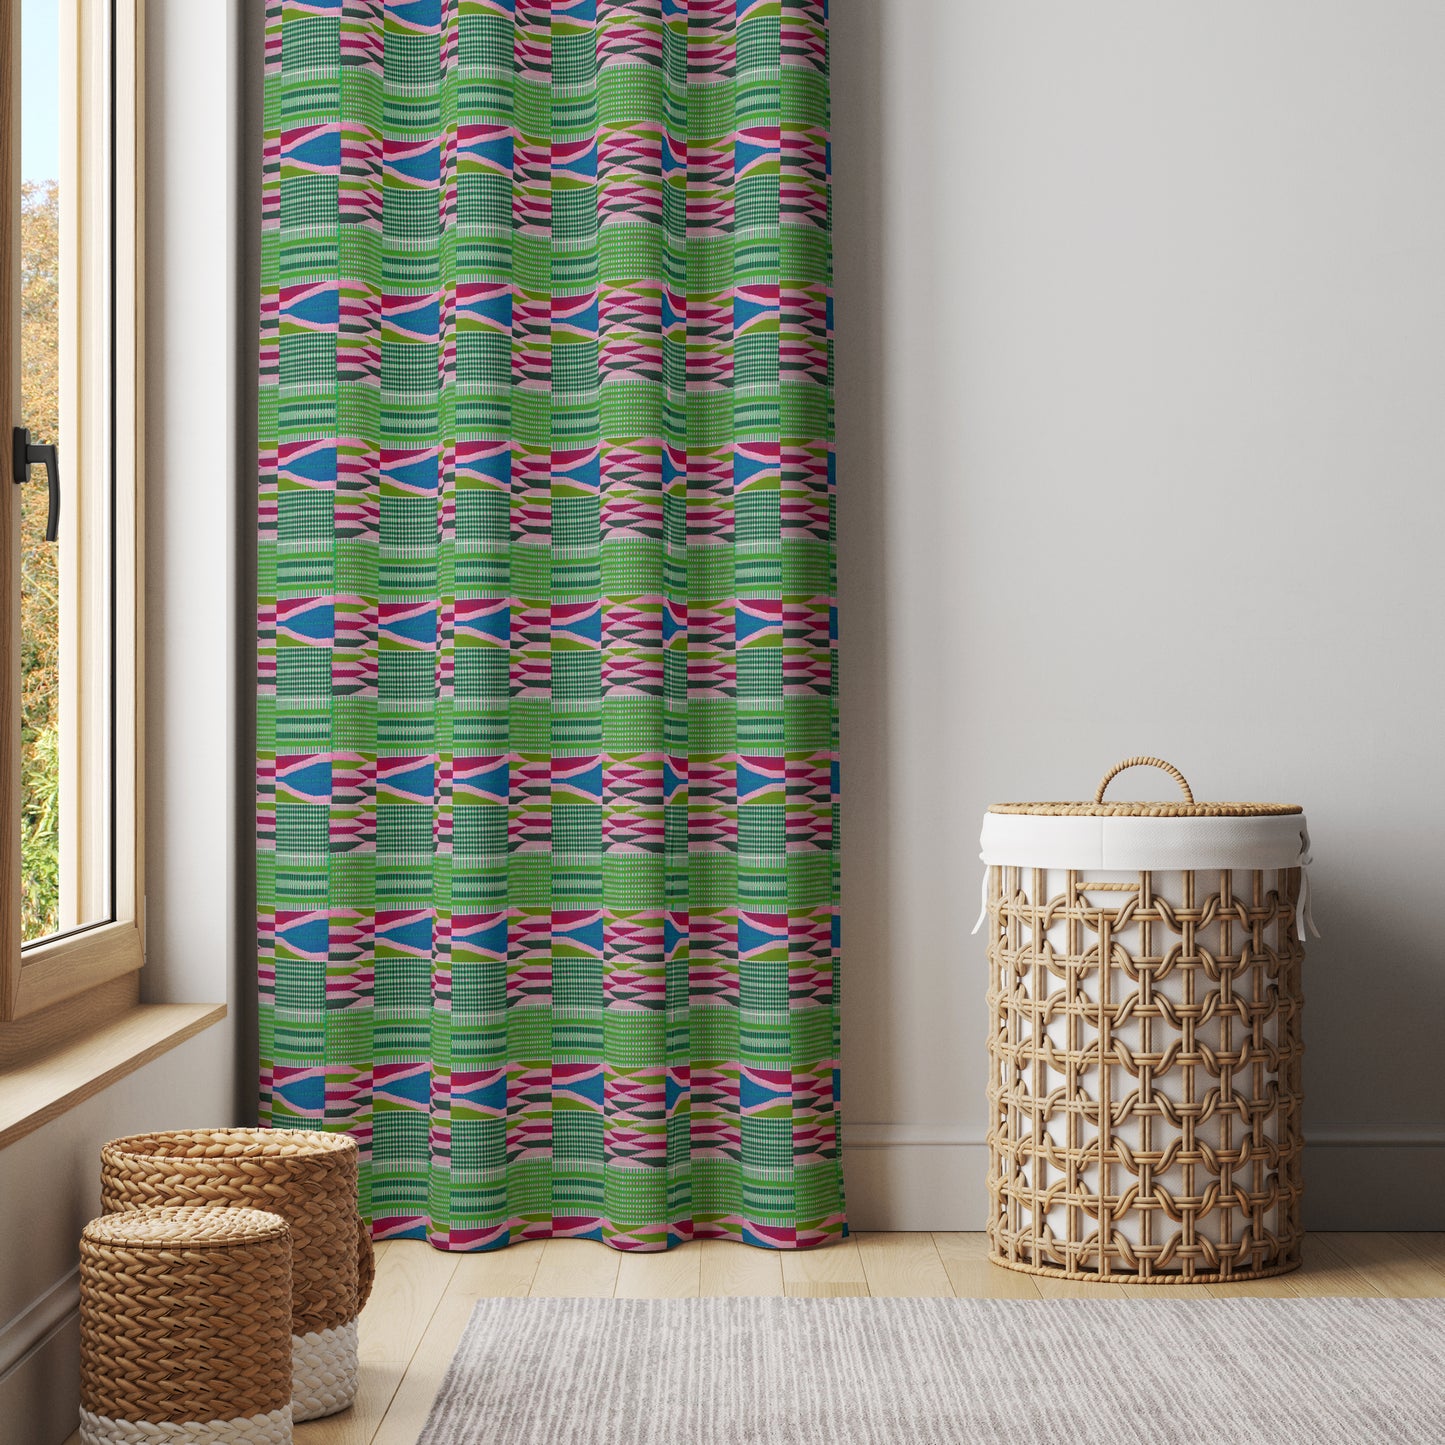 Boho Curtains in African Kente Cloth Inspired - Pink and Green